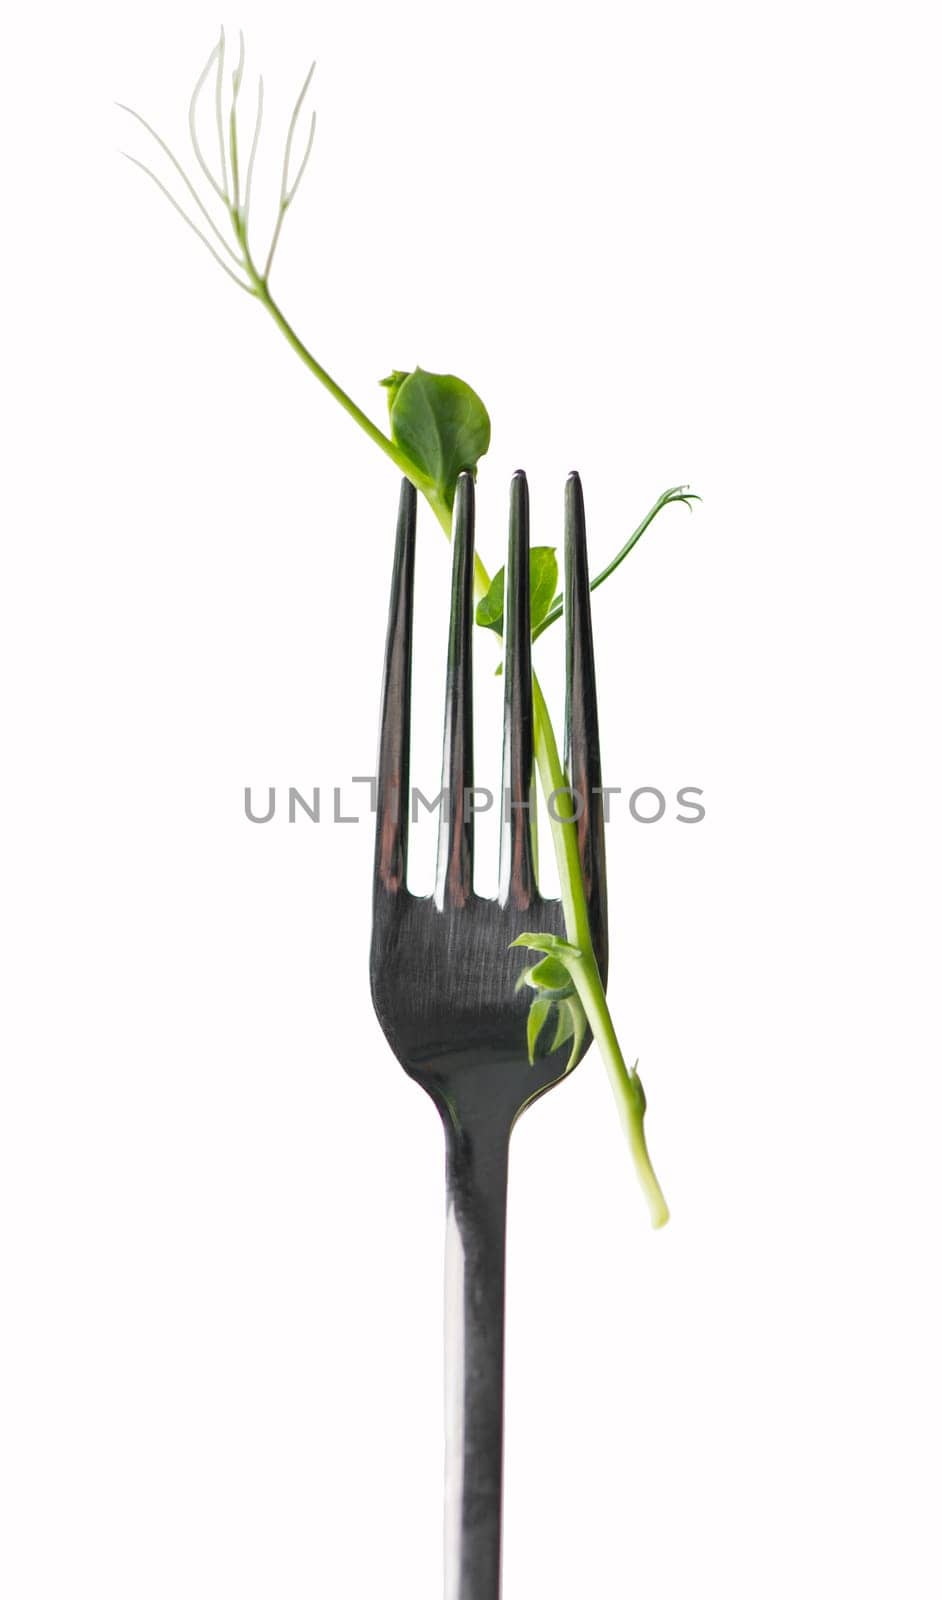 green pea sprout on fork isolated on white . Vegetarianism, healthy eating, growing microgreens